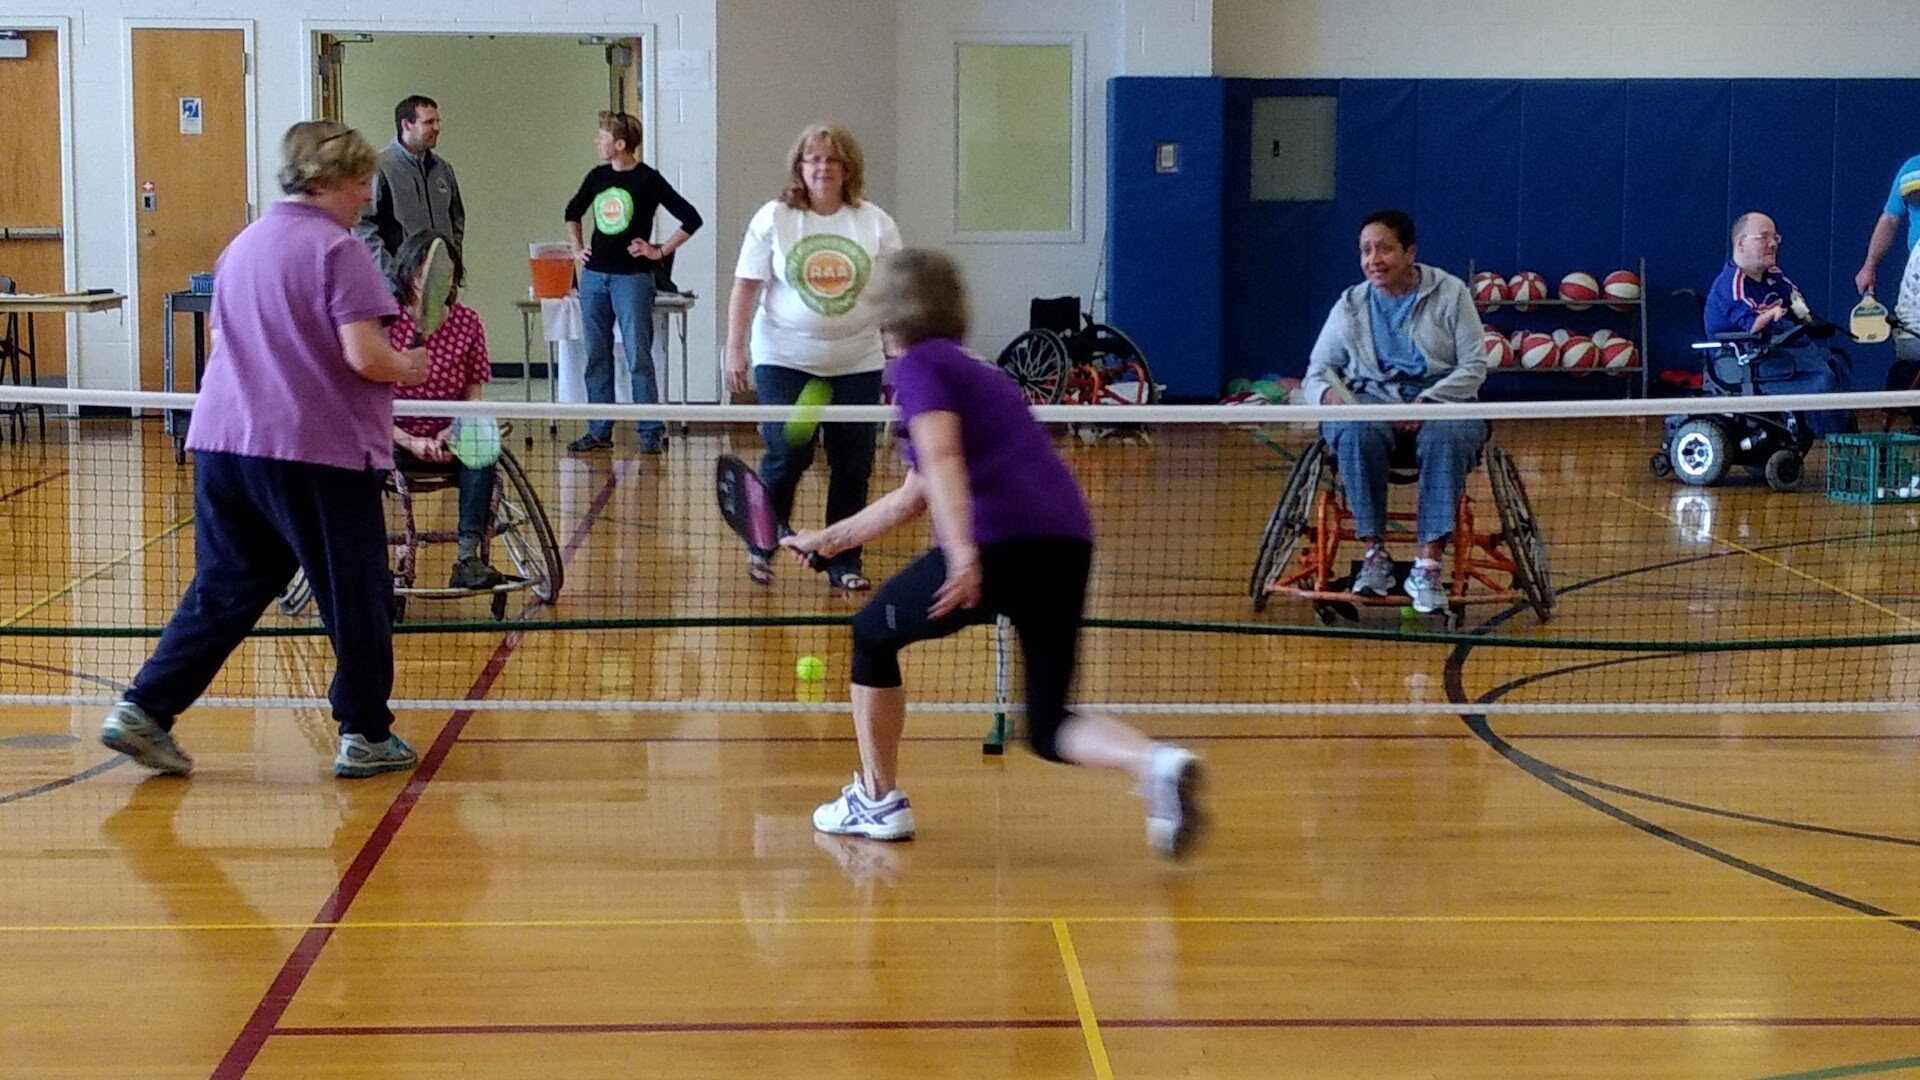 People playing pickleball on an indoor pickleball court. Two or three folks are in wheelchairs as they volley. A couple others are standing.